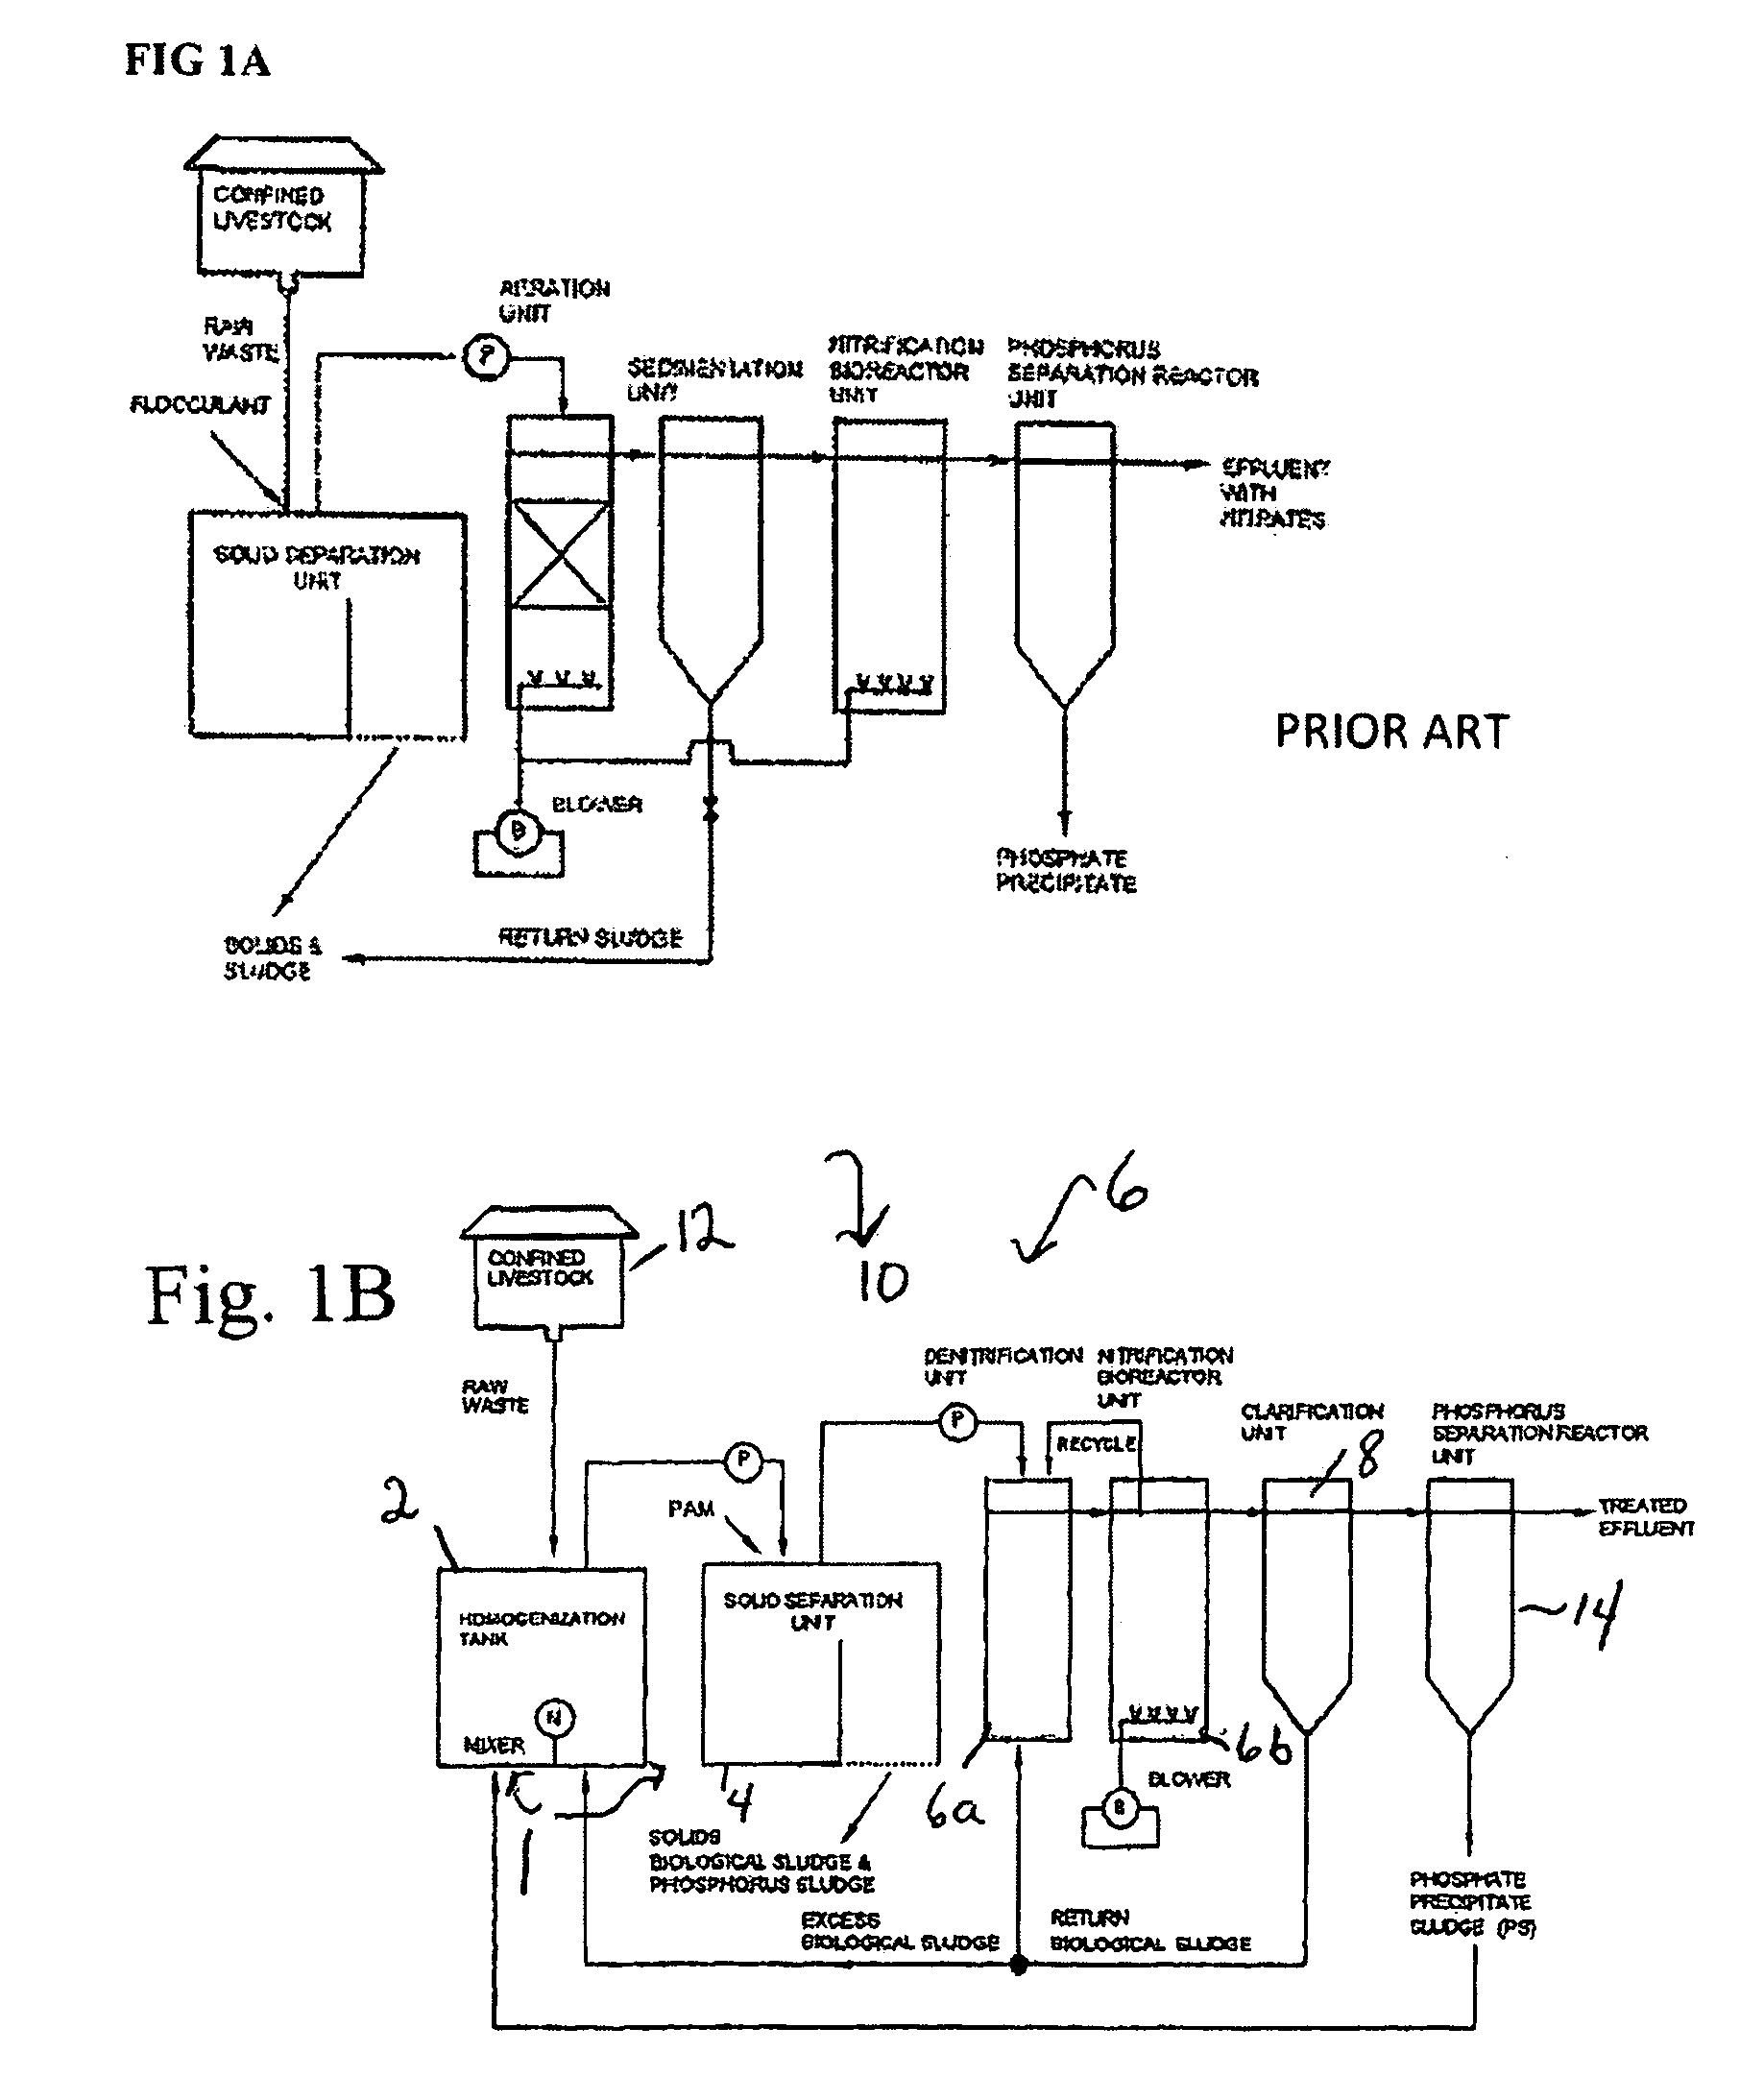 Wastewater treatment system with simultaneous separation of phosphorus and manure solids